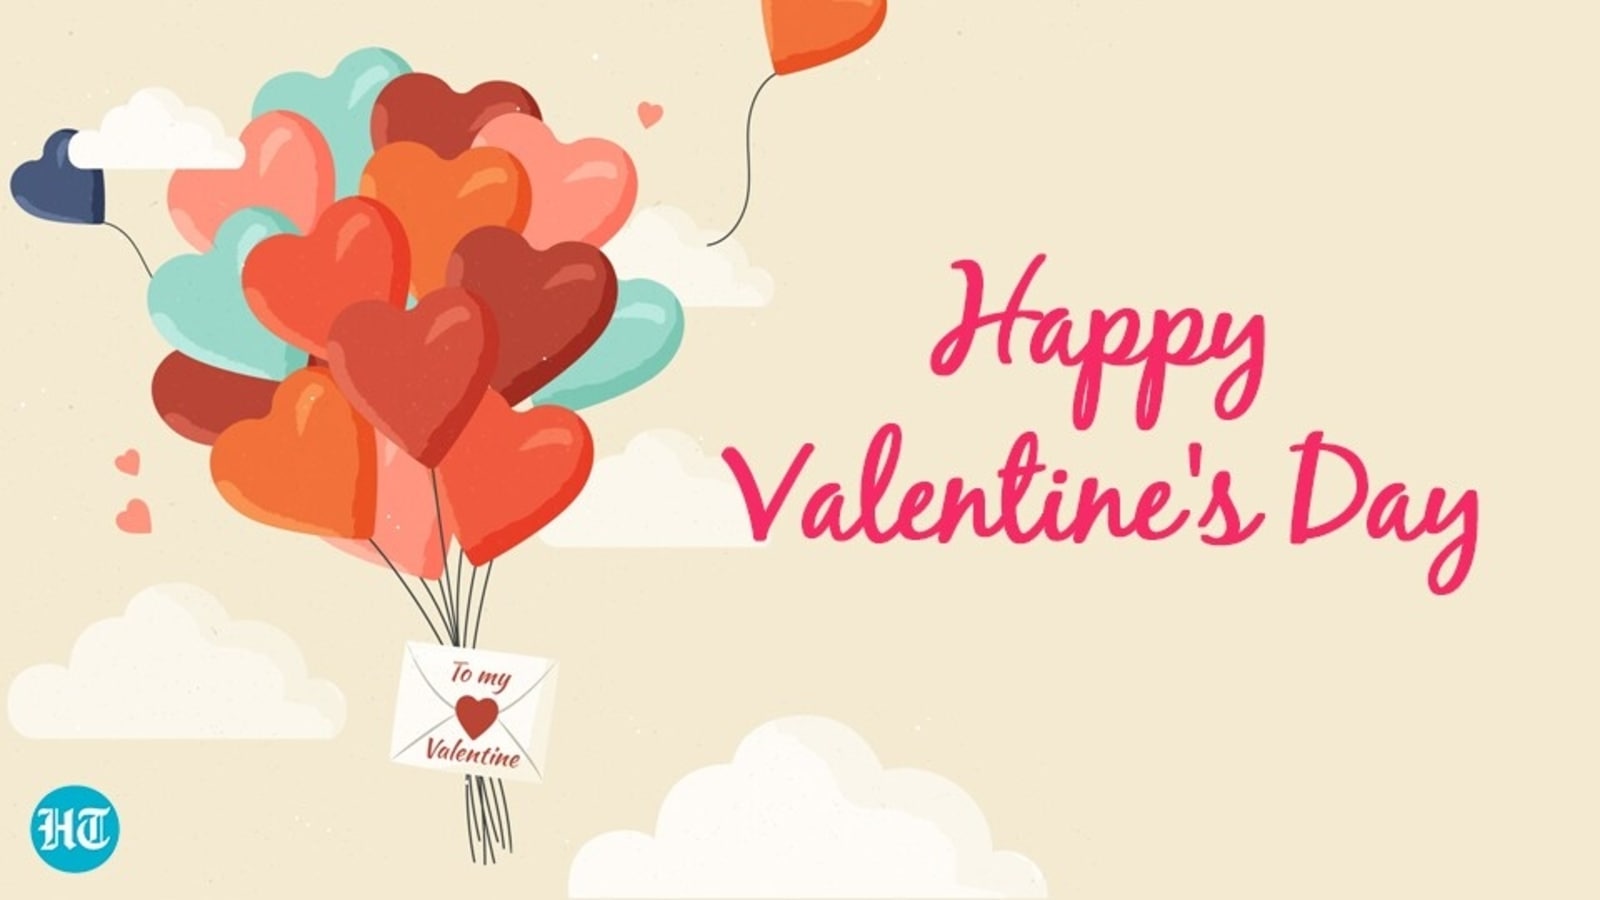 Happy Valentine's Day 2022: Wishes, images, messages to celebrate ...